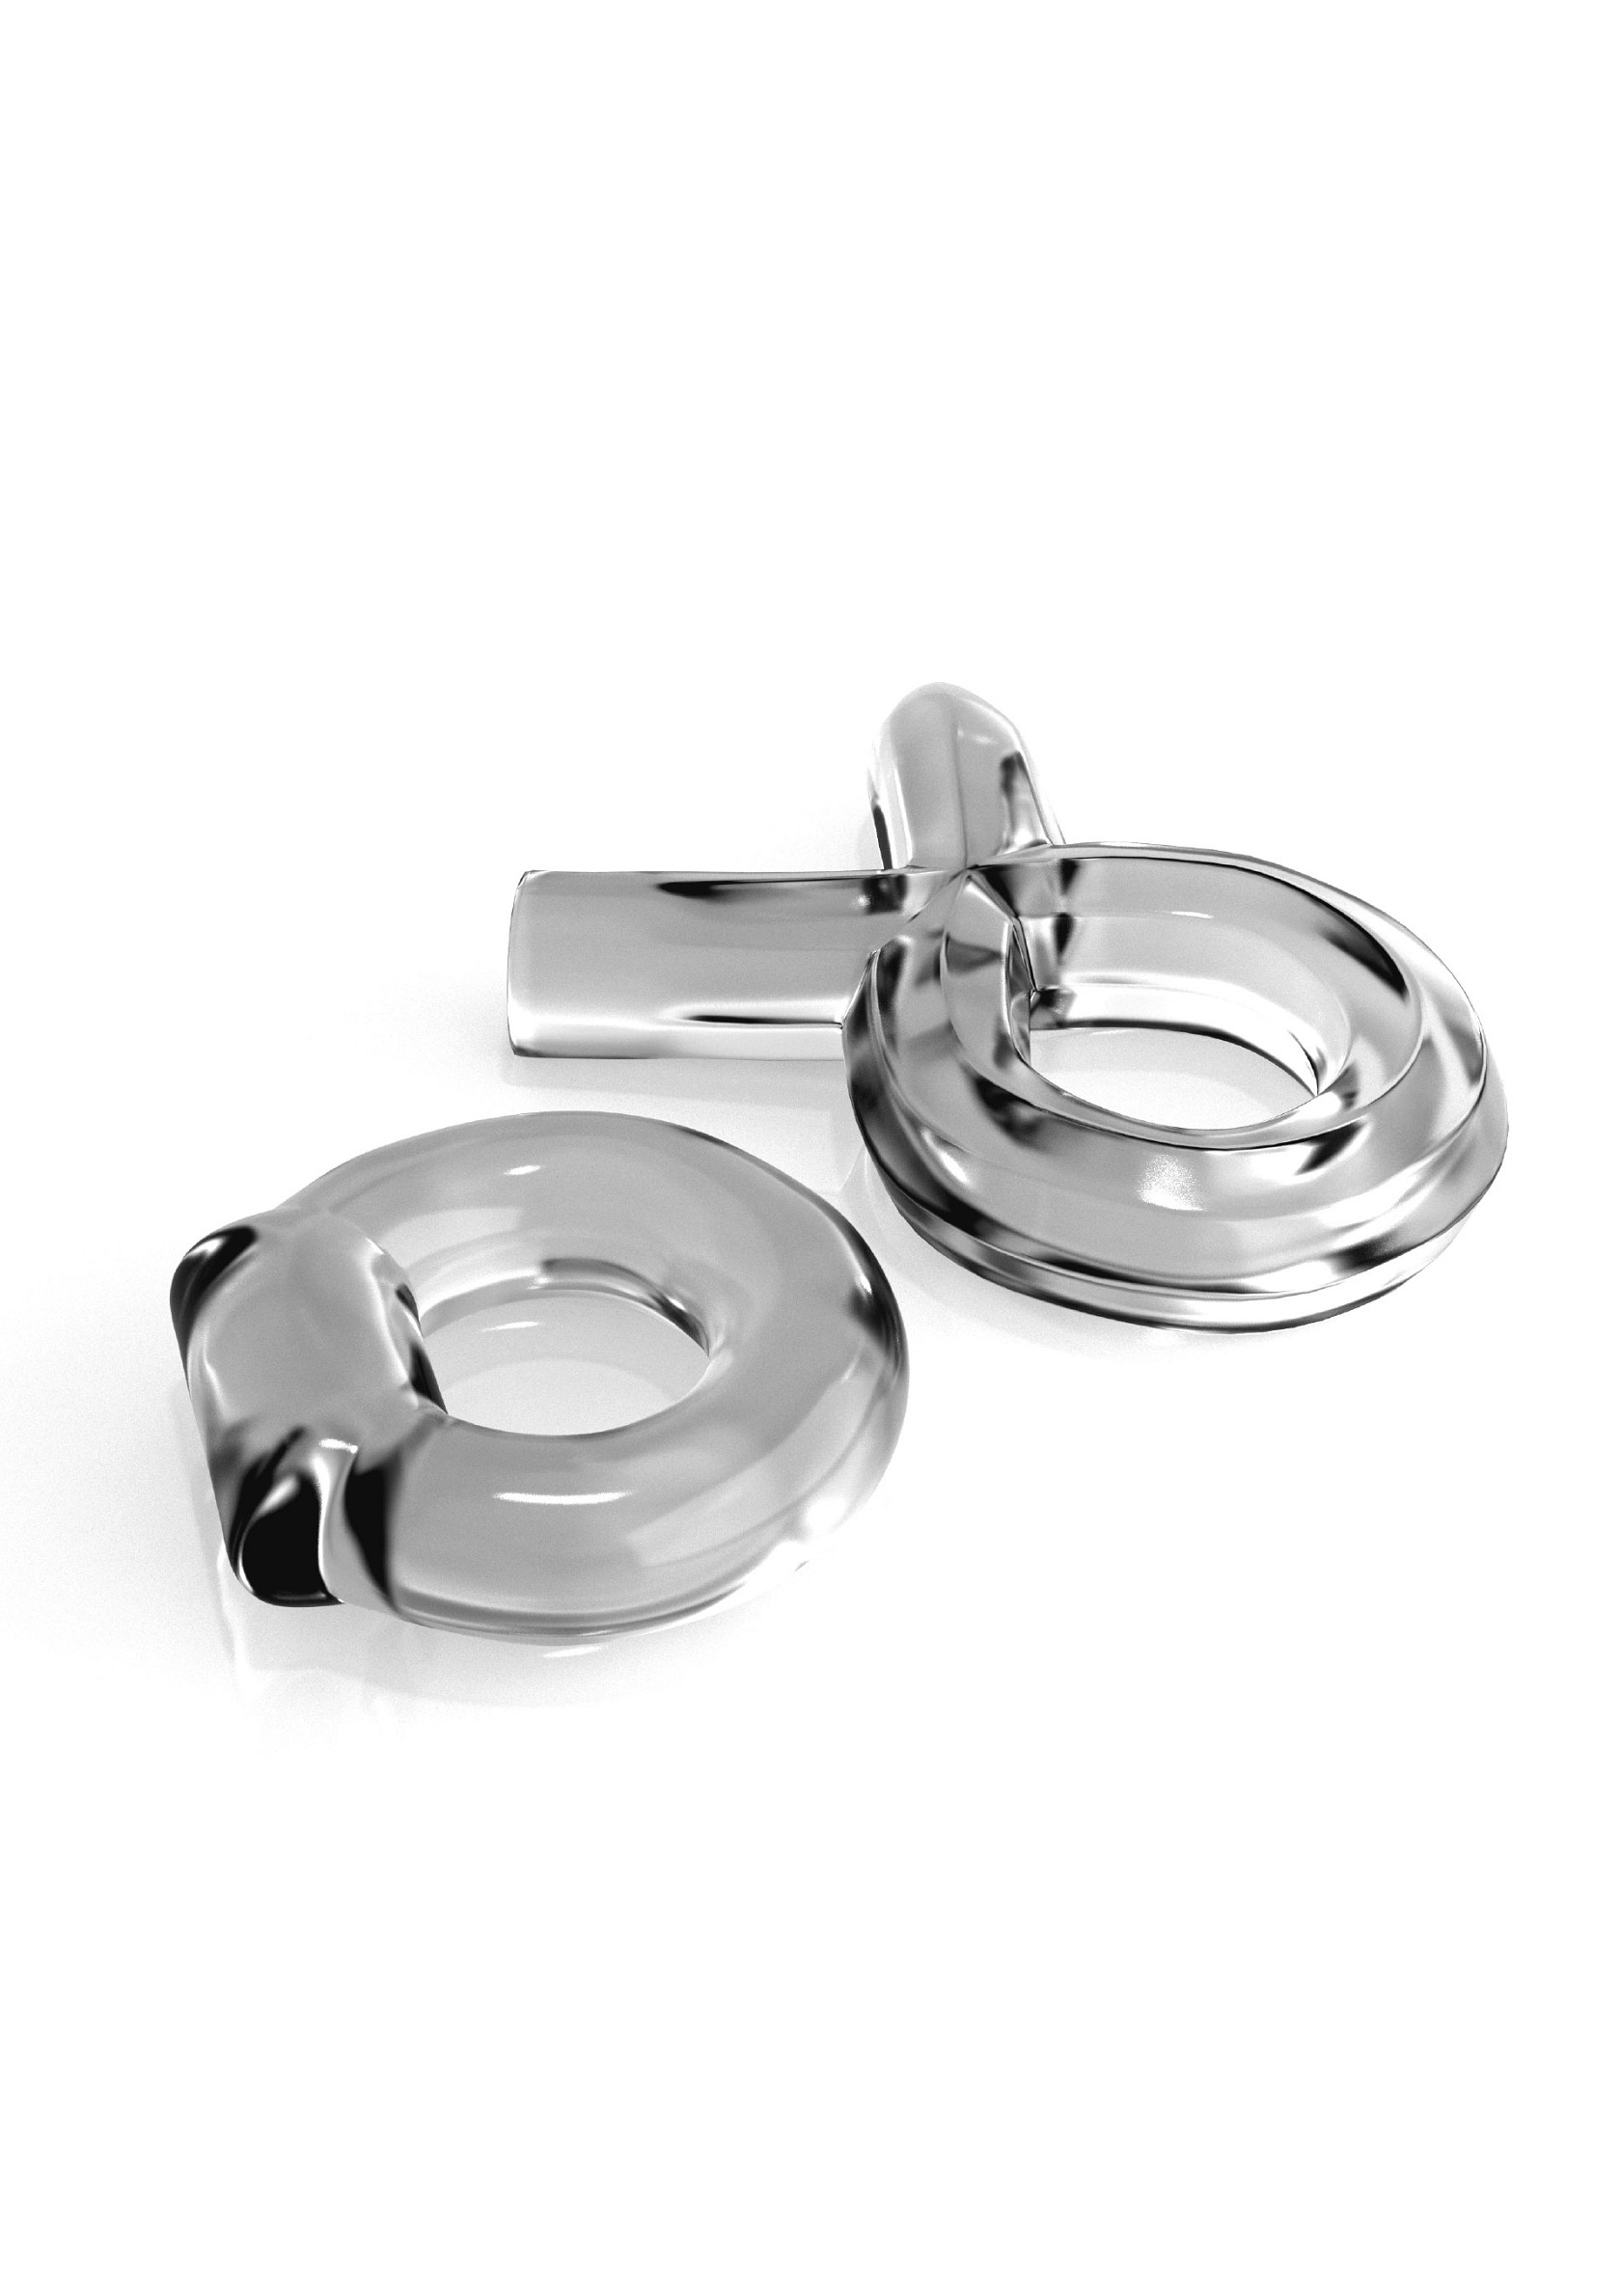 Couples Cock Ring Set